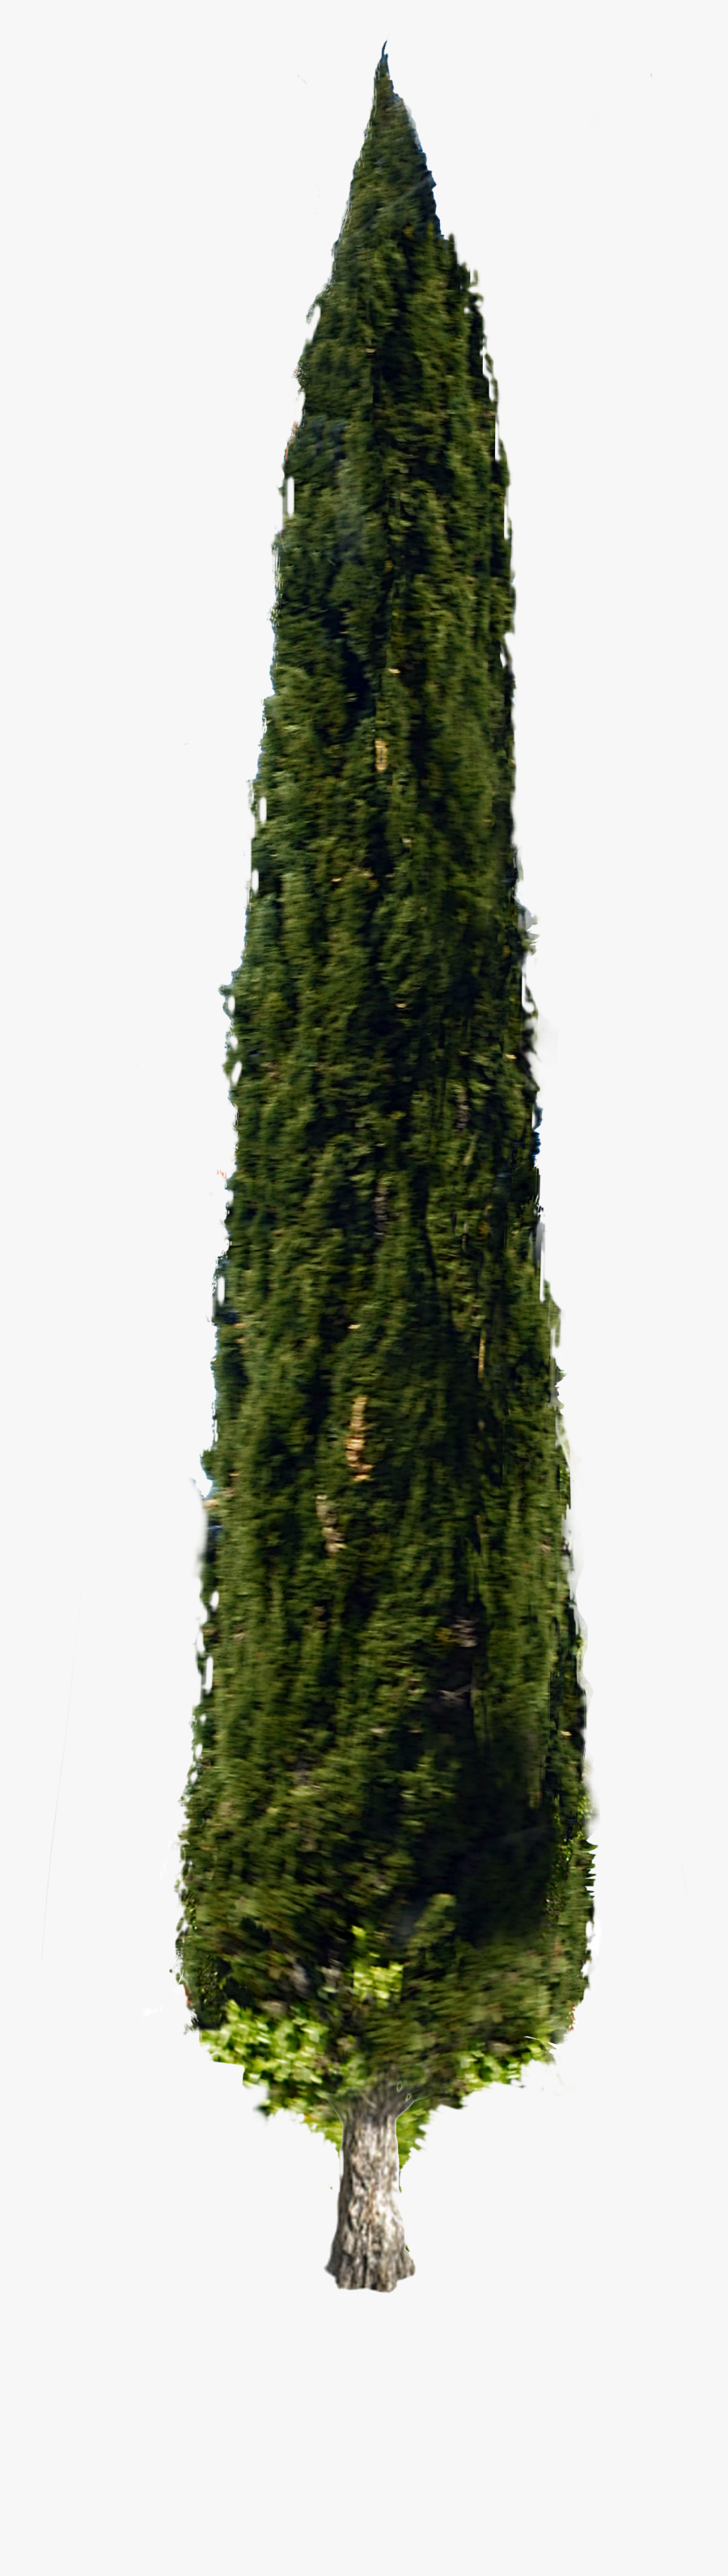 Italian Cypress Tree Stock Png Photo Dsc0119 By Annamae22 - Cypress Pine Tree Png, Transparent Clipart